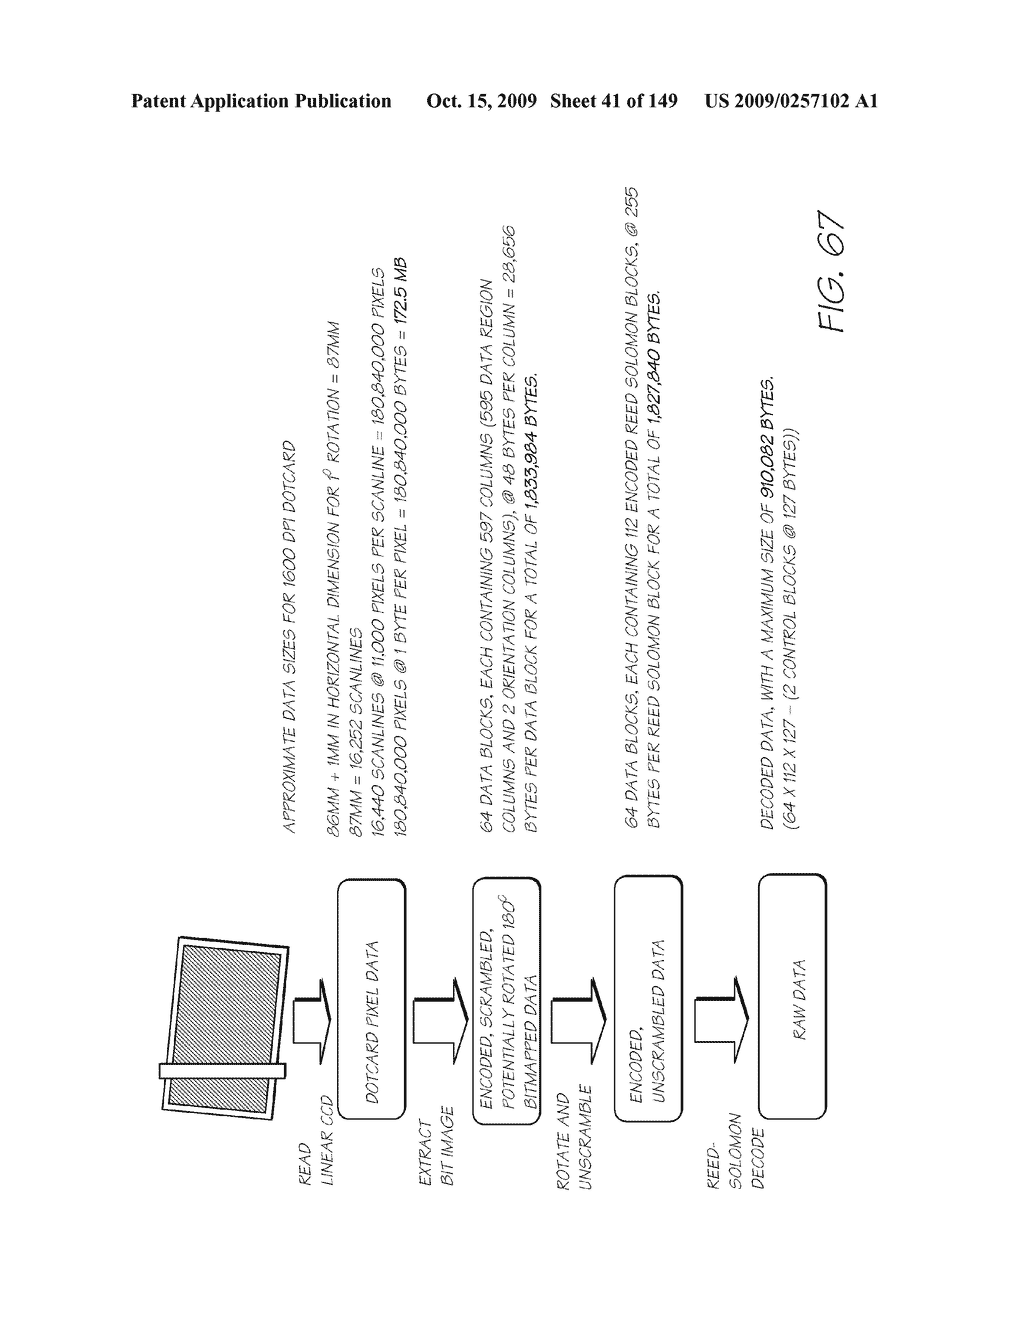 IMAGE PROCESSING APPARATUS HAVING CARD READER FOR APPLYING EFFECTS STORED ON A CARD TO A STORED IMAGE - diagram, schematic, and image 42